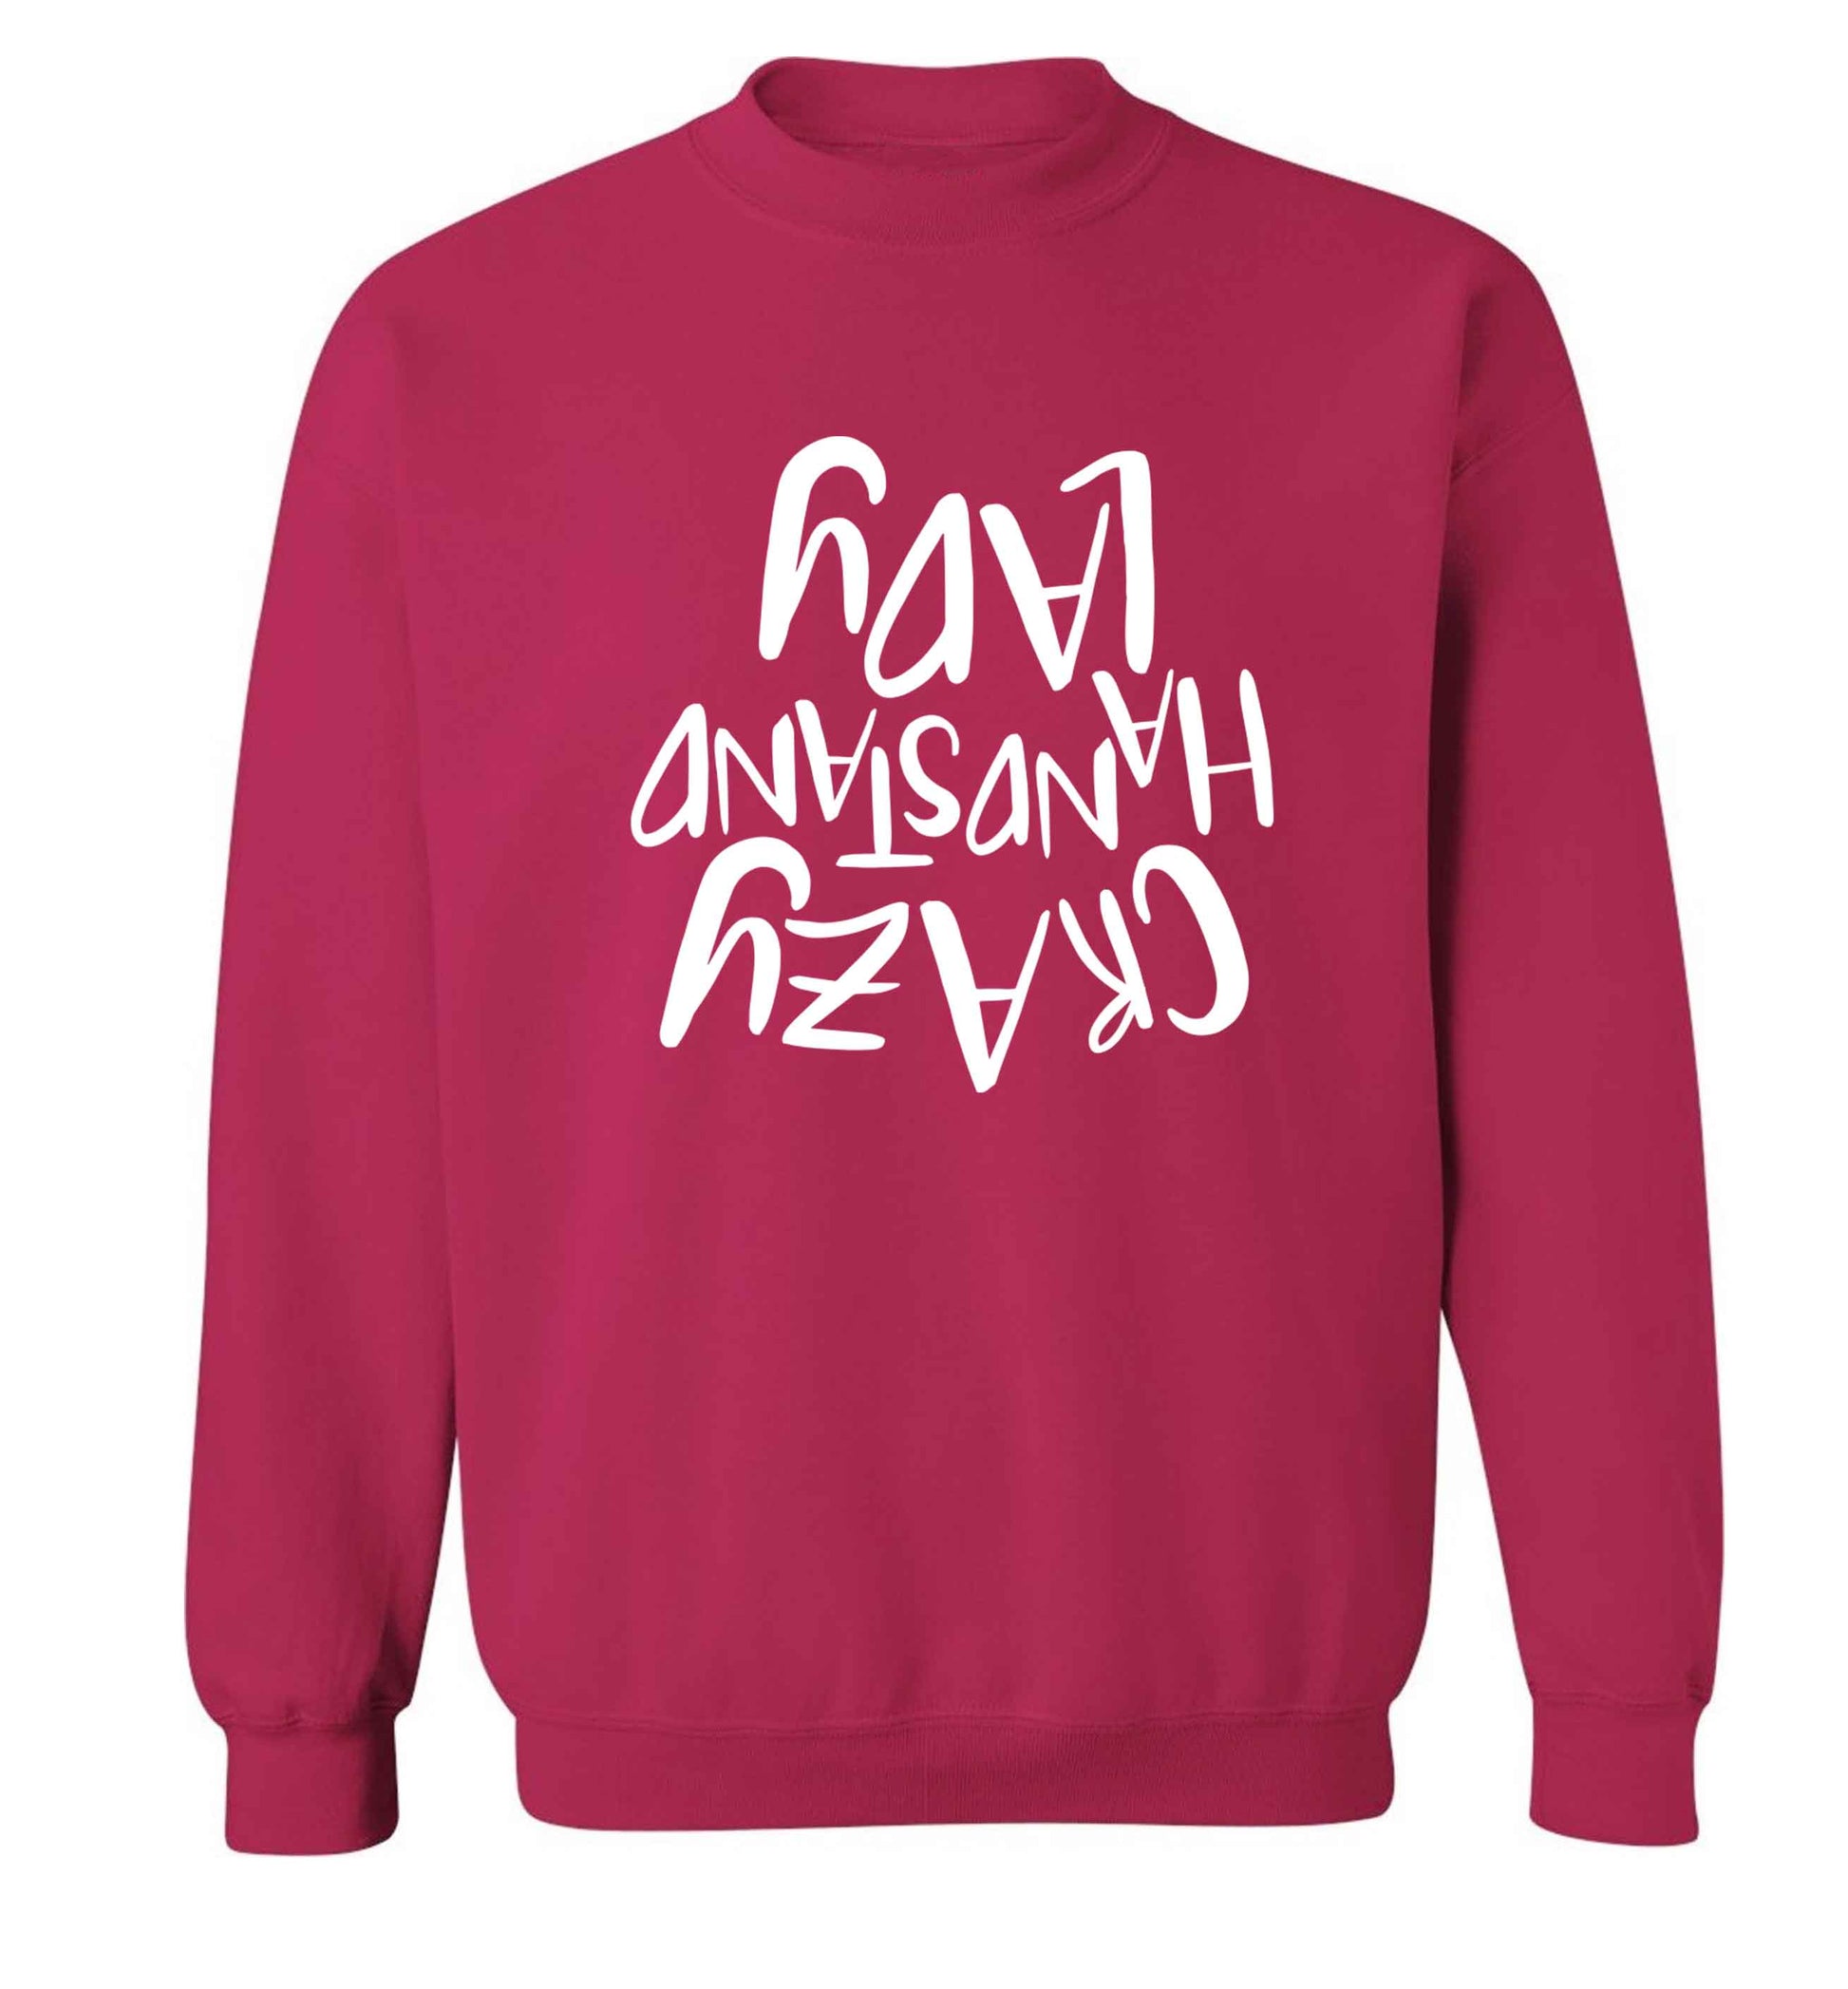 Crazy handstand lady Adult's unisex pink Sweater 2XL